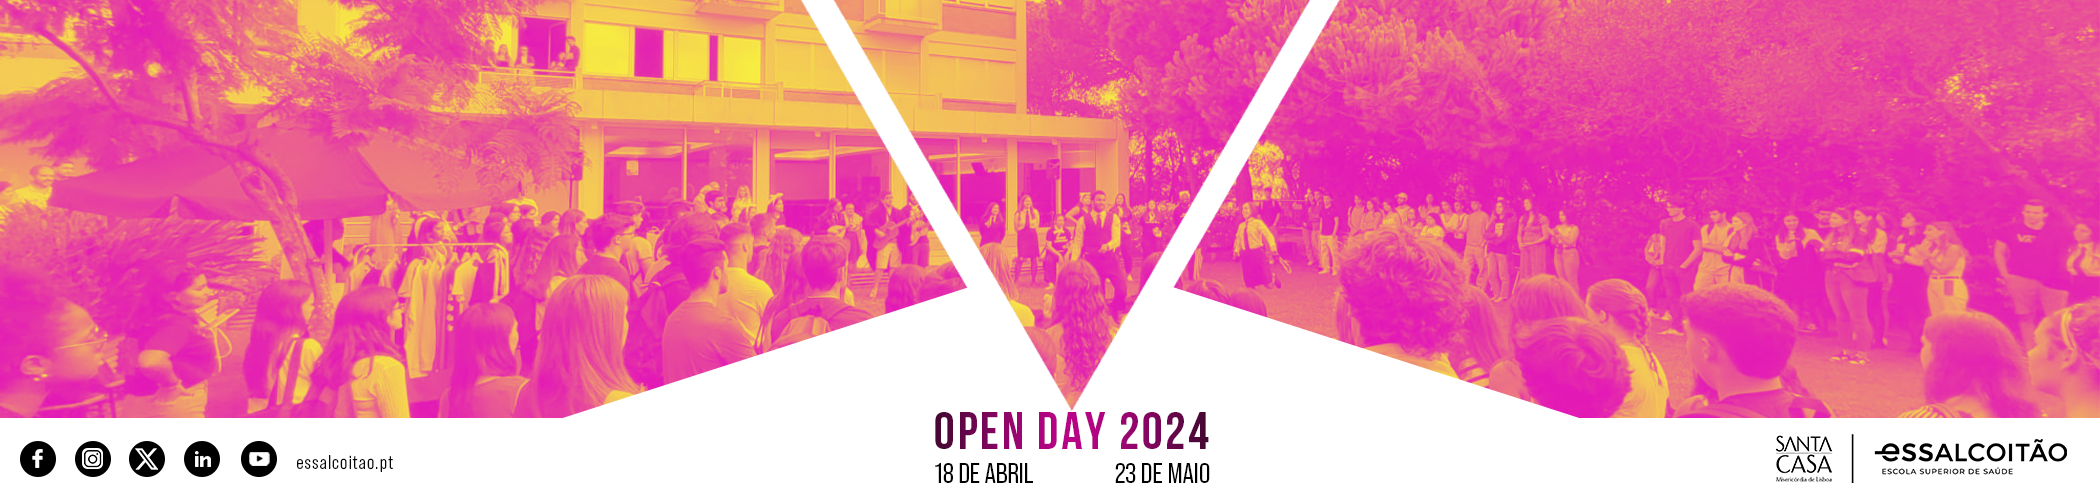 Banner_Open_Day_2024